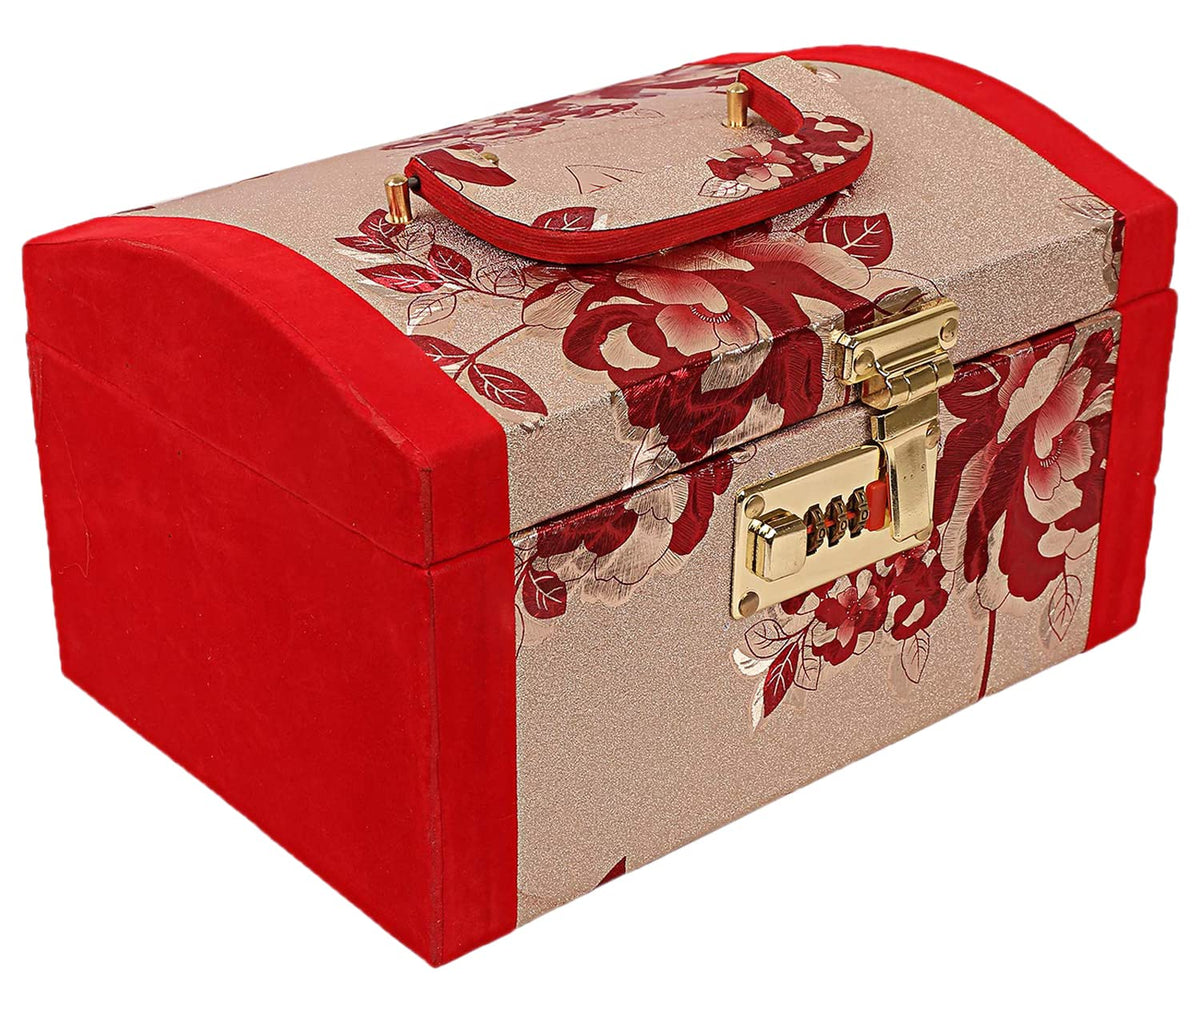 Heart Home Flower Printed Wooden Jewellery Box/Organizer For Storing Makeup, Jewellery, Bangles, Cosmetics & Toiletries Items With 1 Bangle Rod, Mirror & Number Lock System (Red)-47HH0533